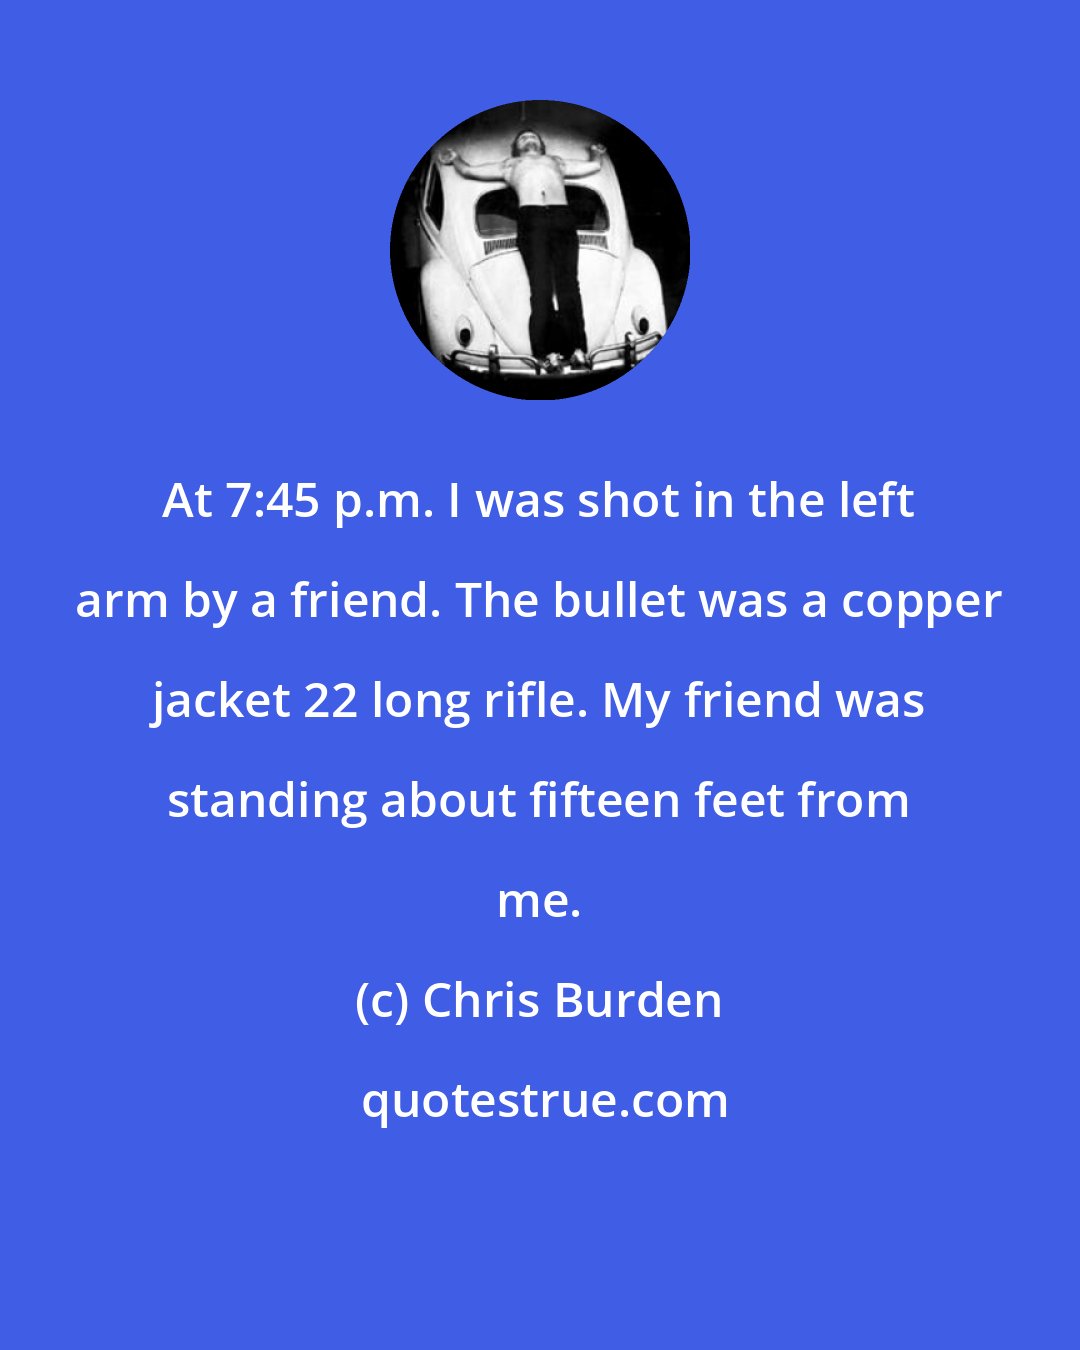 Chris Burden: At 7:45 p.m. I was shot in the left arm by a friend. The bullet was a copper jacket 22 long rifle. My friend was standing about fifteen feet from me.